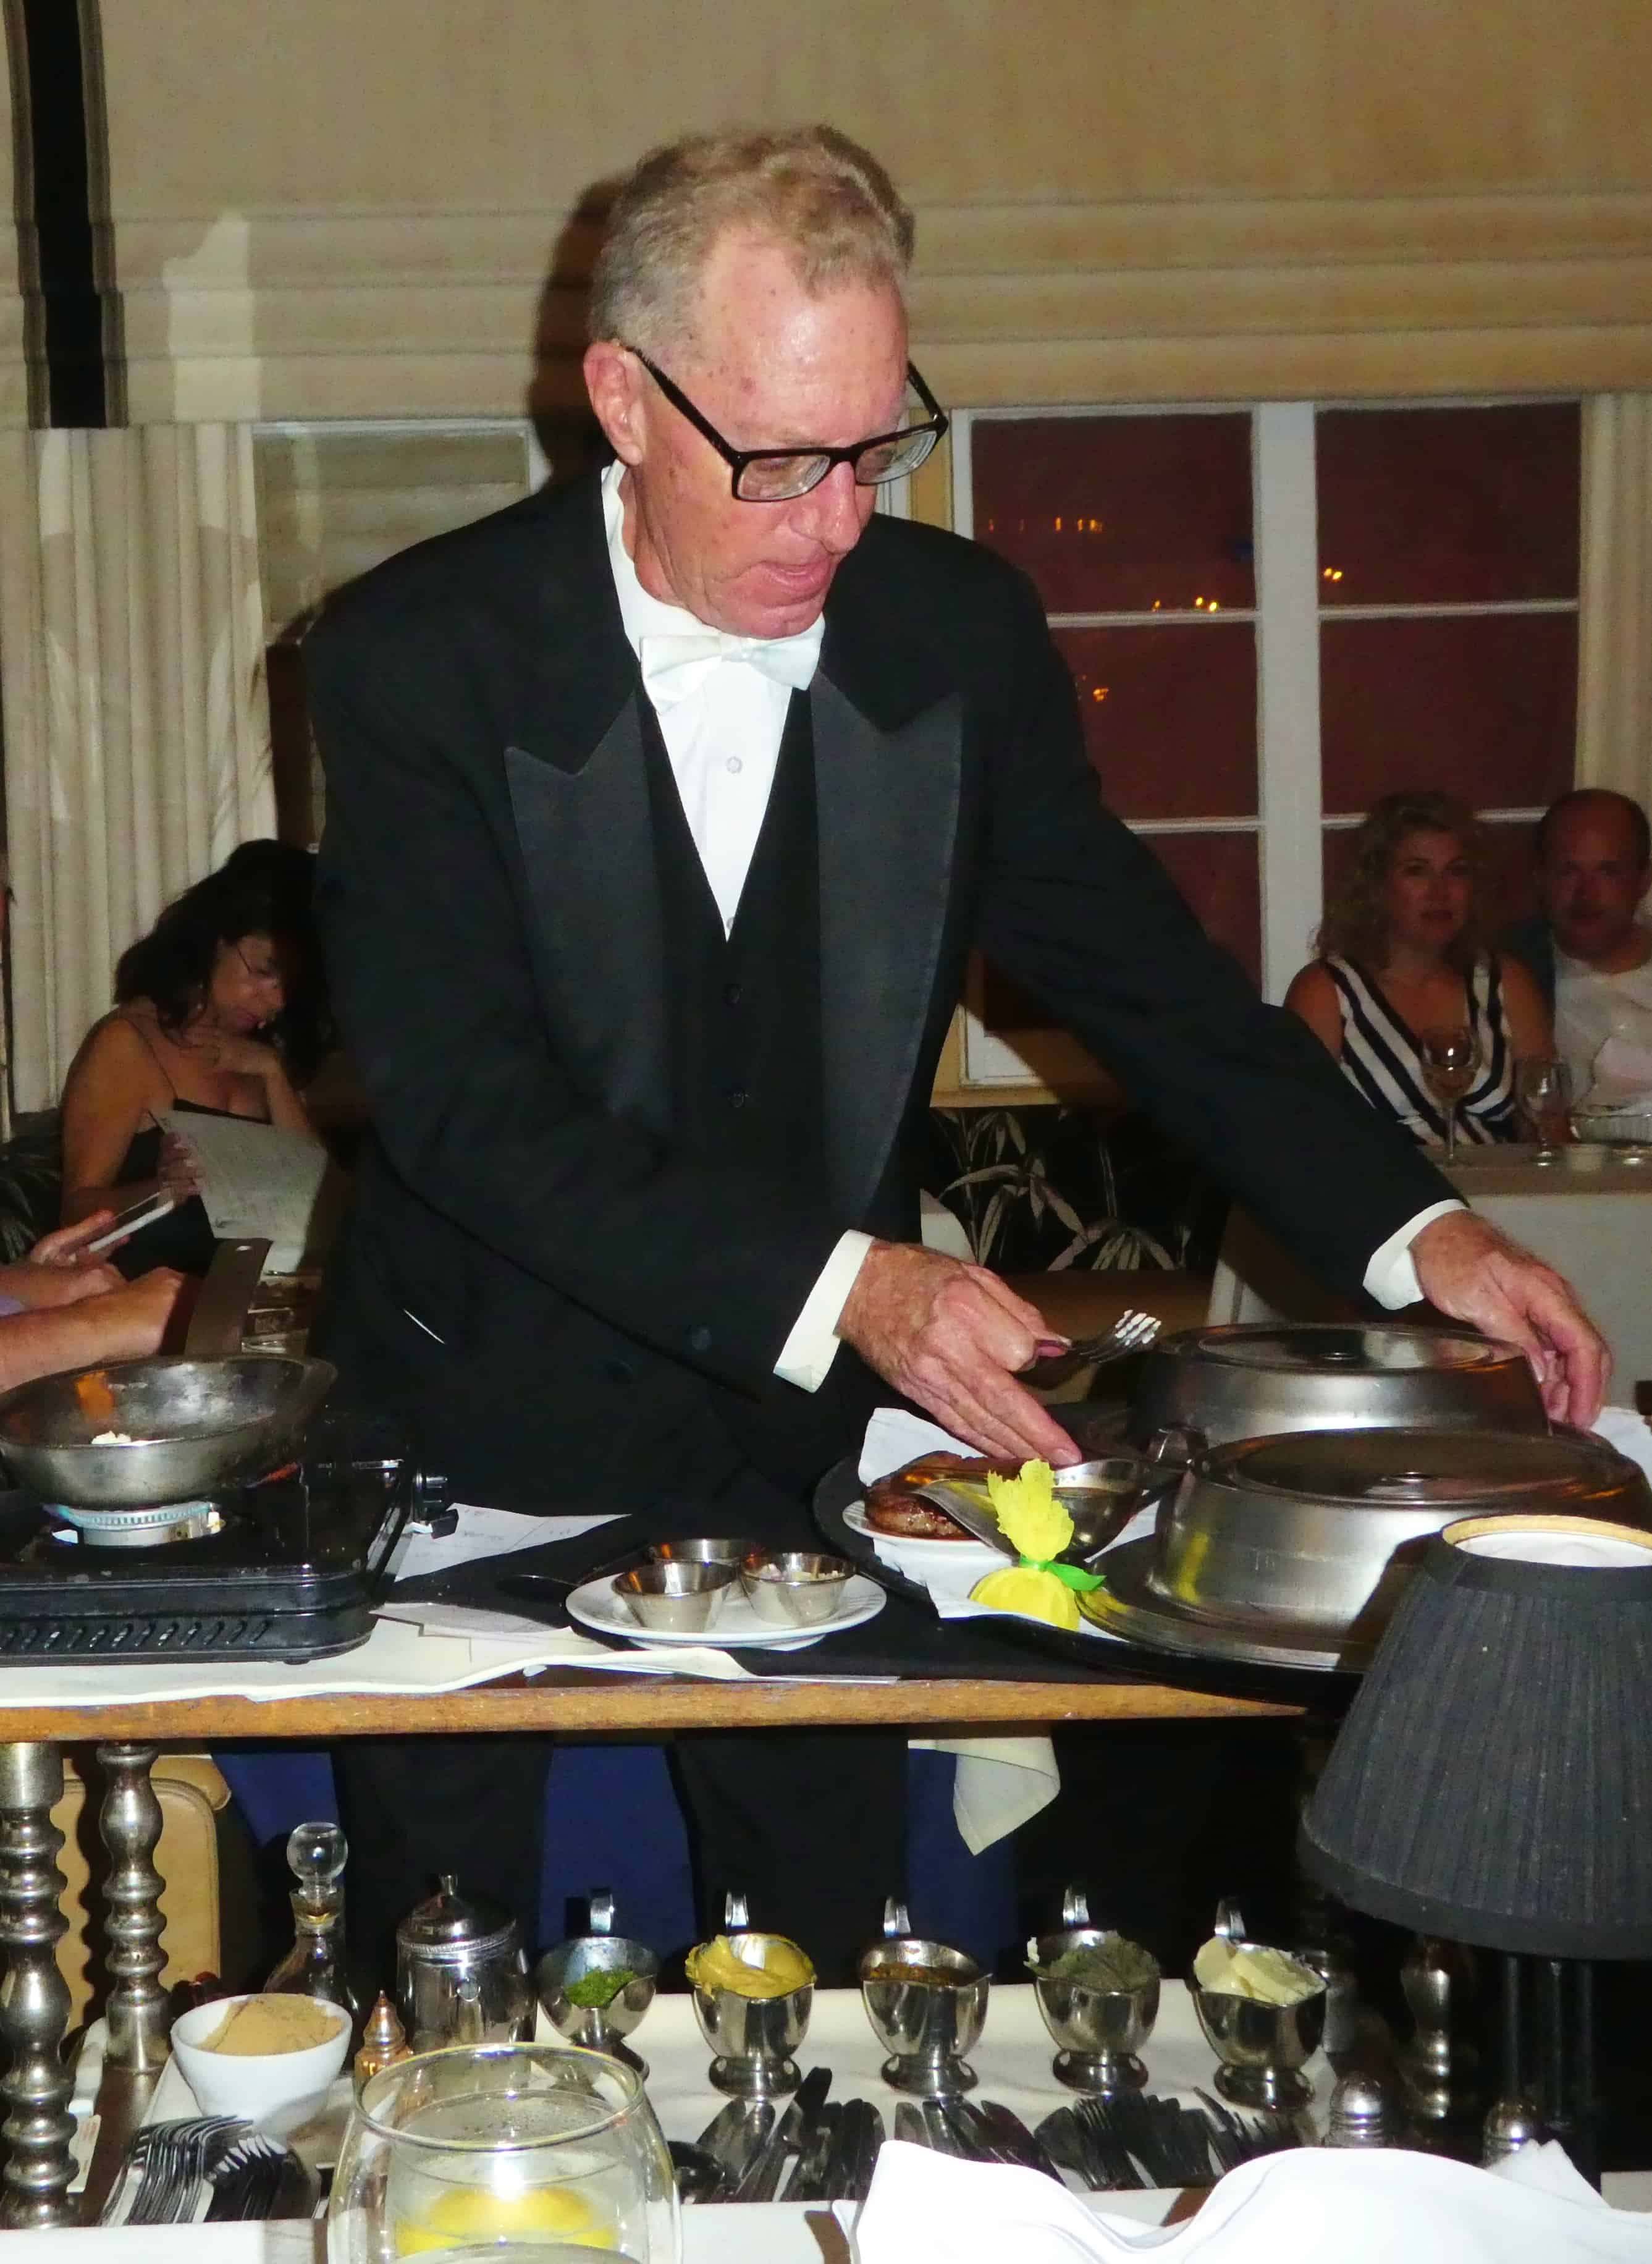 Tuxedoed waiter at Melvyn's Palm Springs